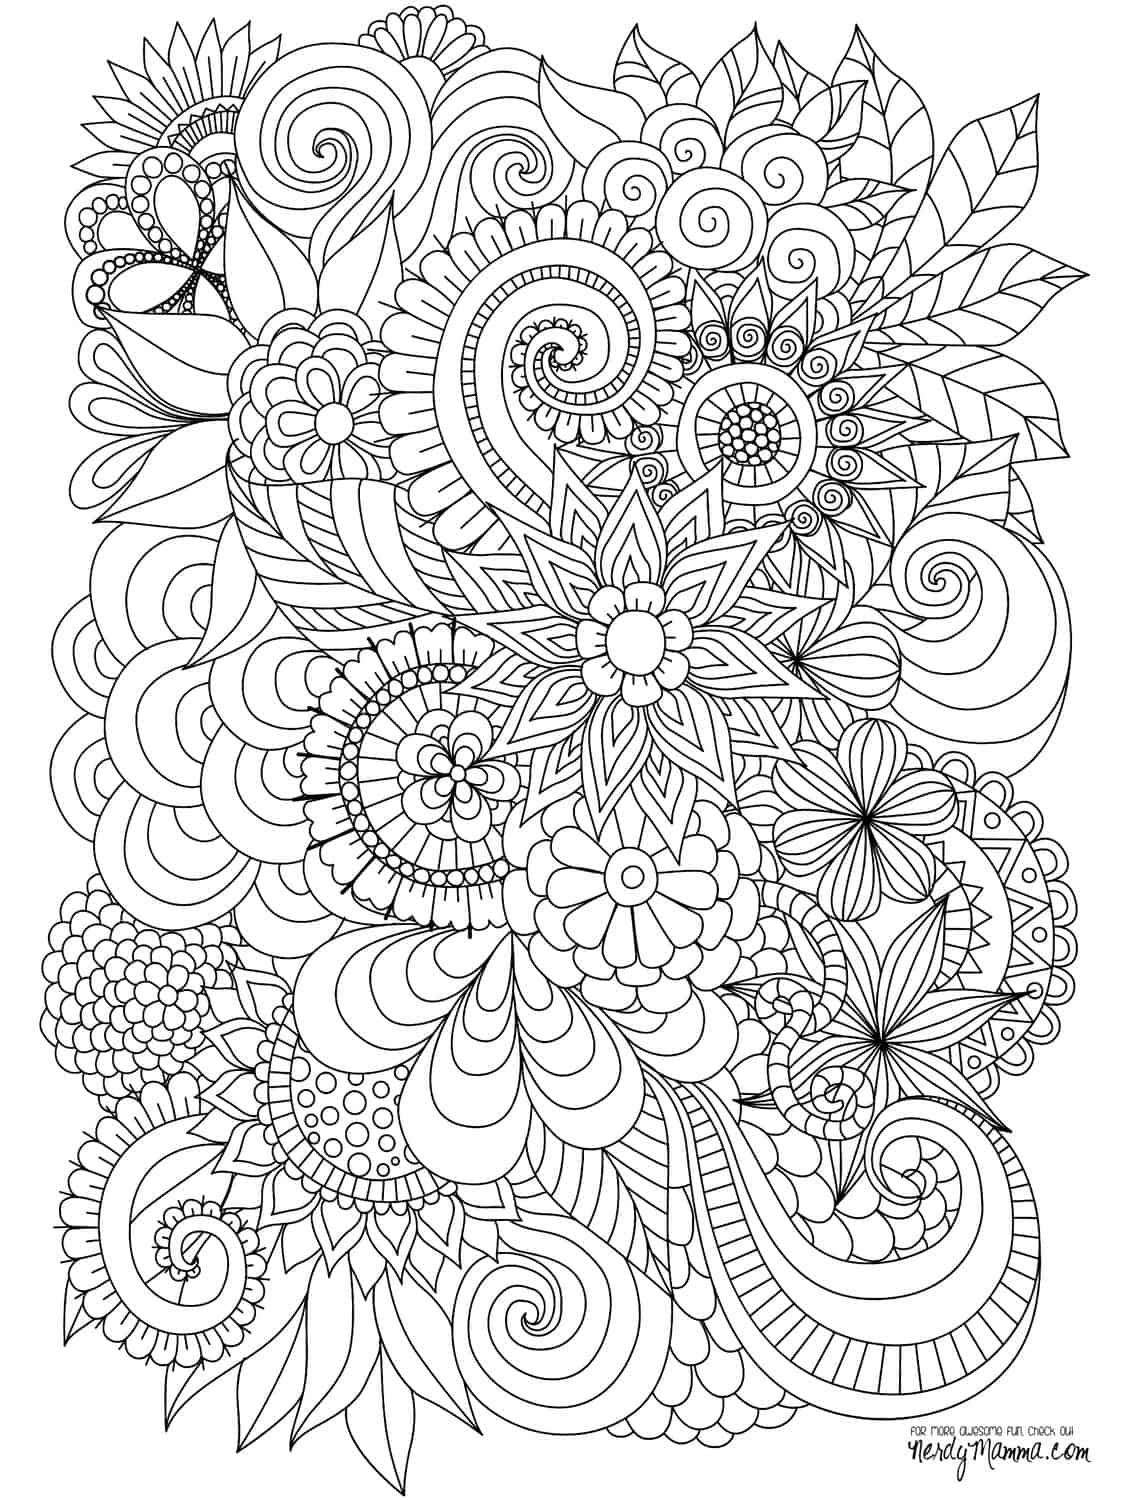 1000+ Images About More Coloring On Pinterest | Coloring Books